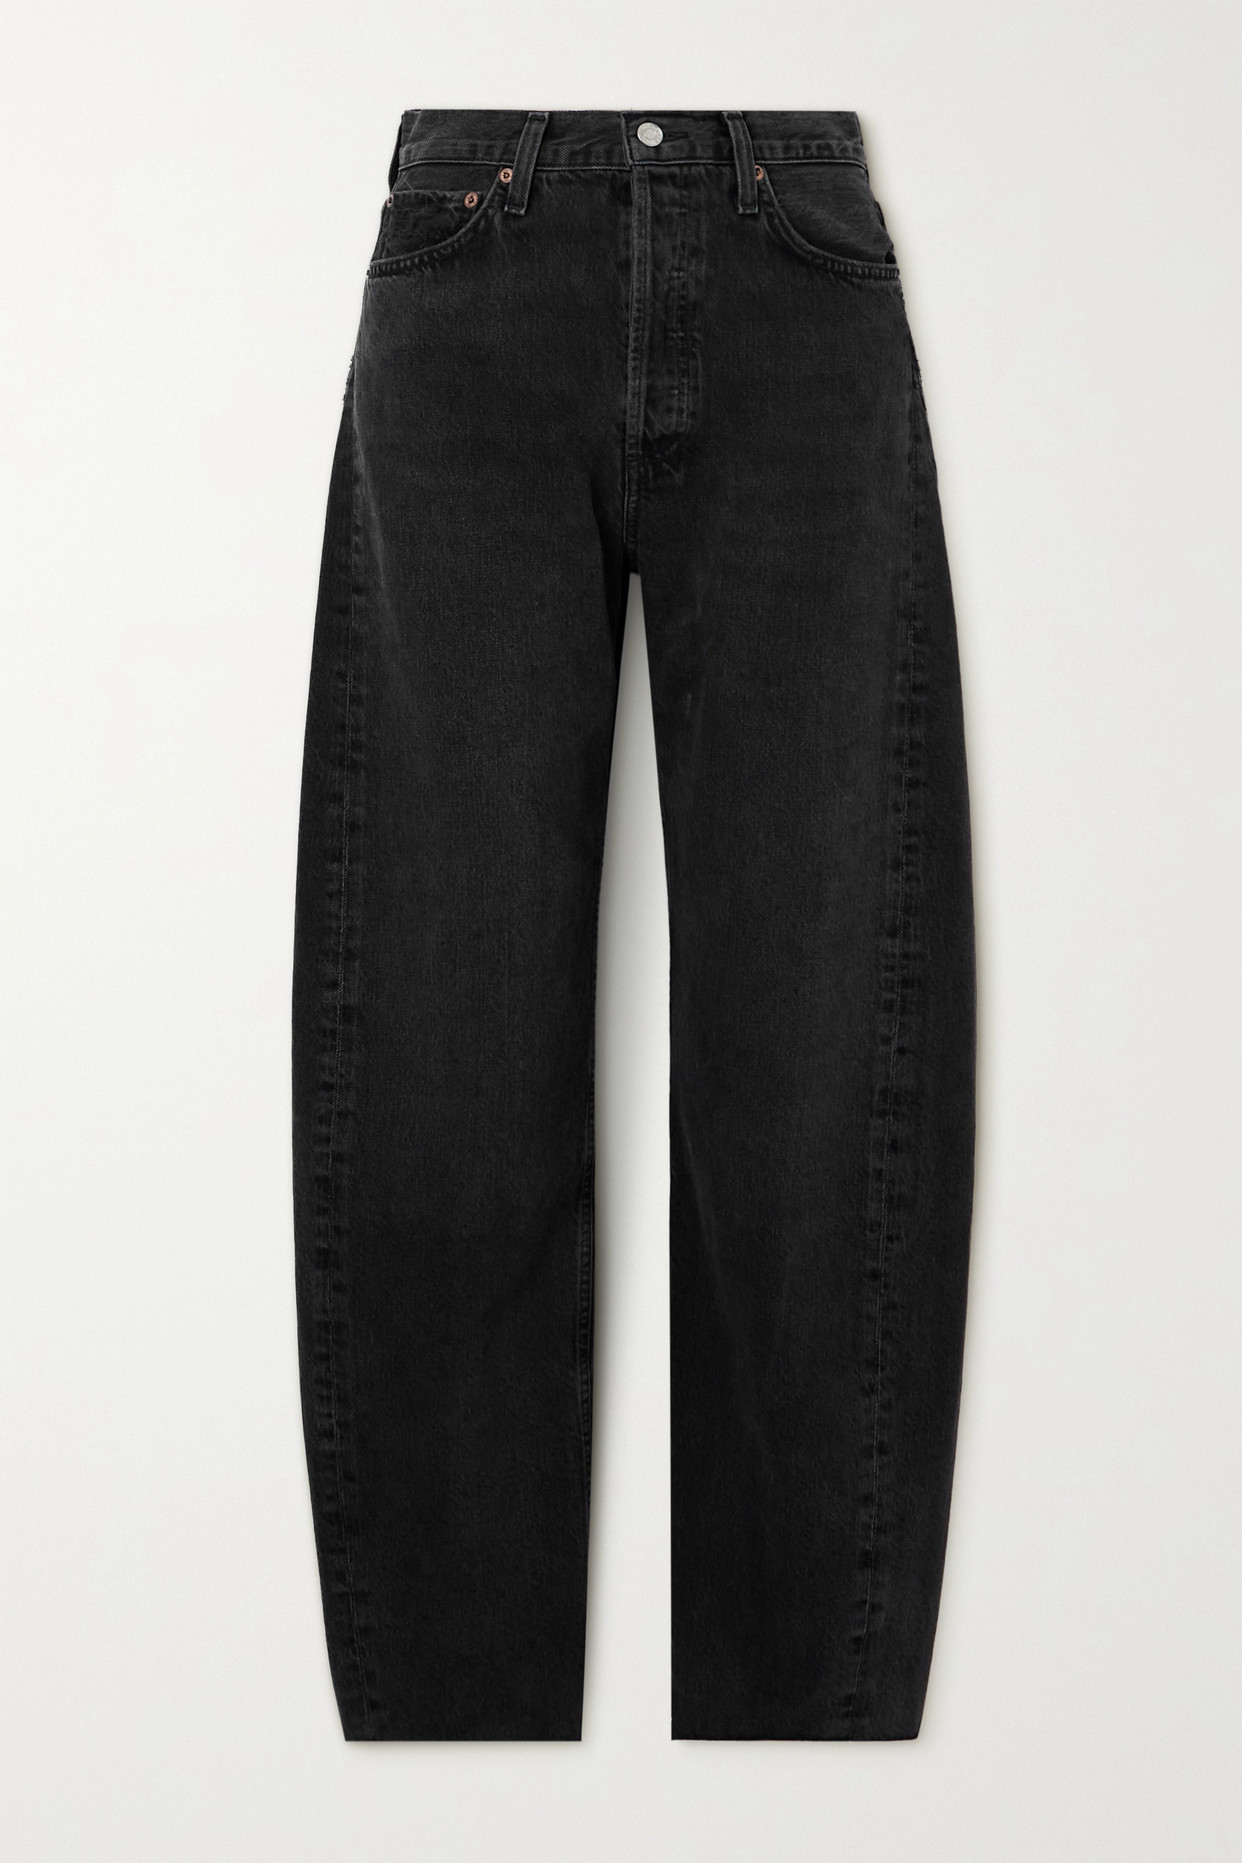 + Net Sustain Luna High-Rise Tapered Organic Jeans